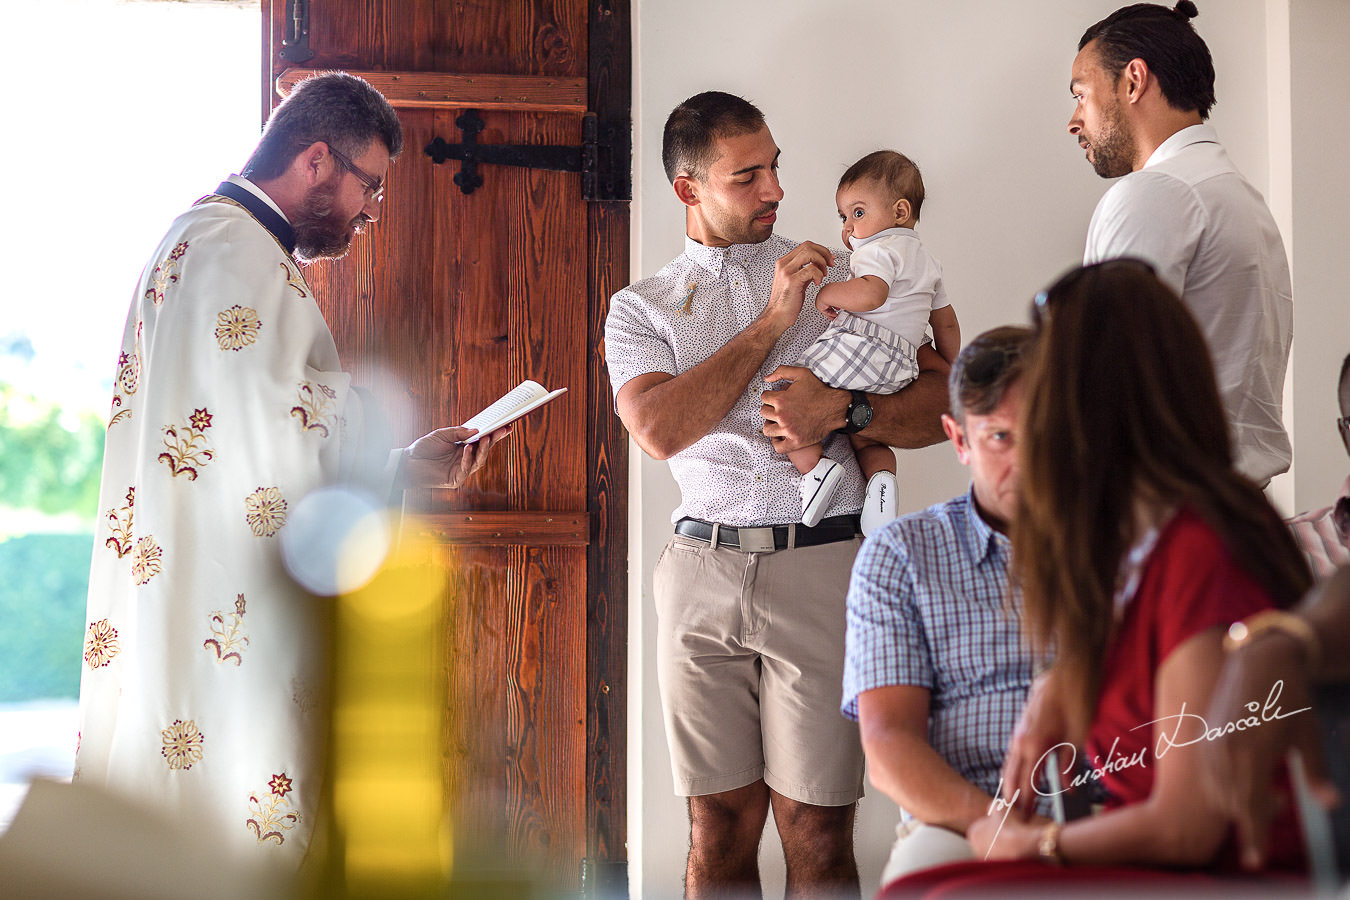 A Christening Ceremony at the beautiful Anassa Hotel photographed by Cyprus Photographer Cristian Dascalu.